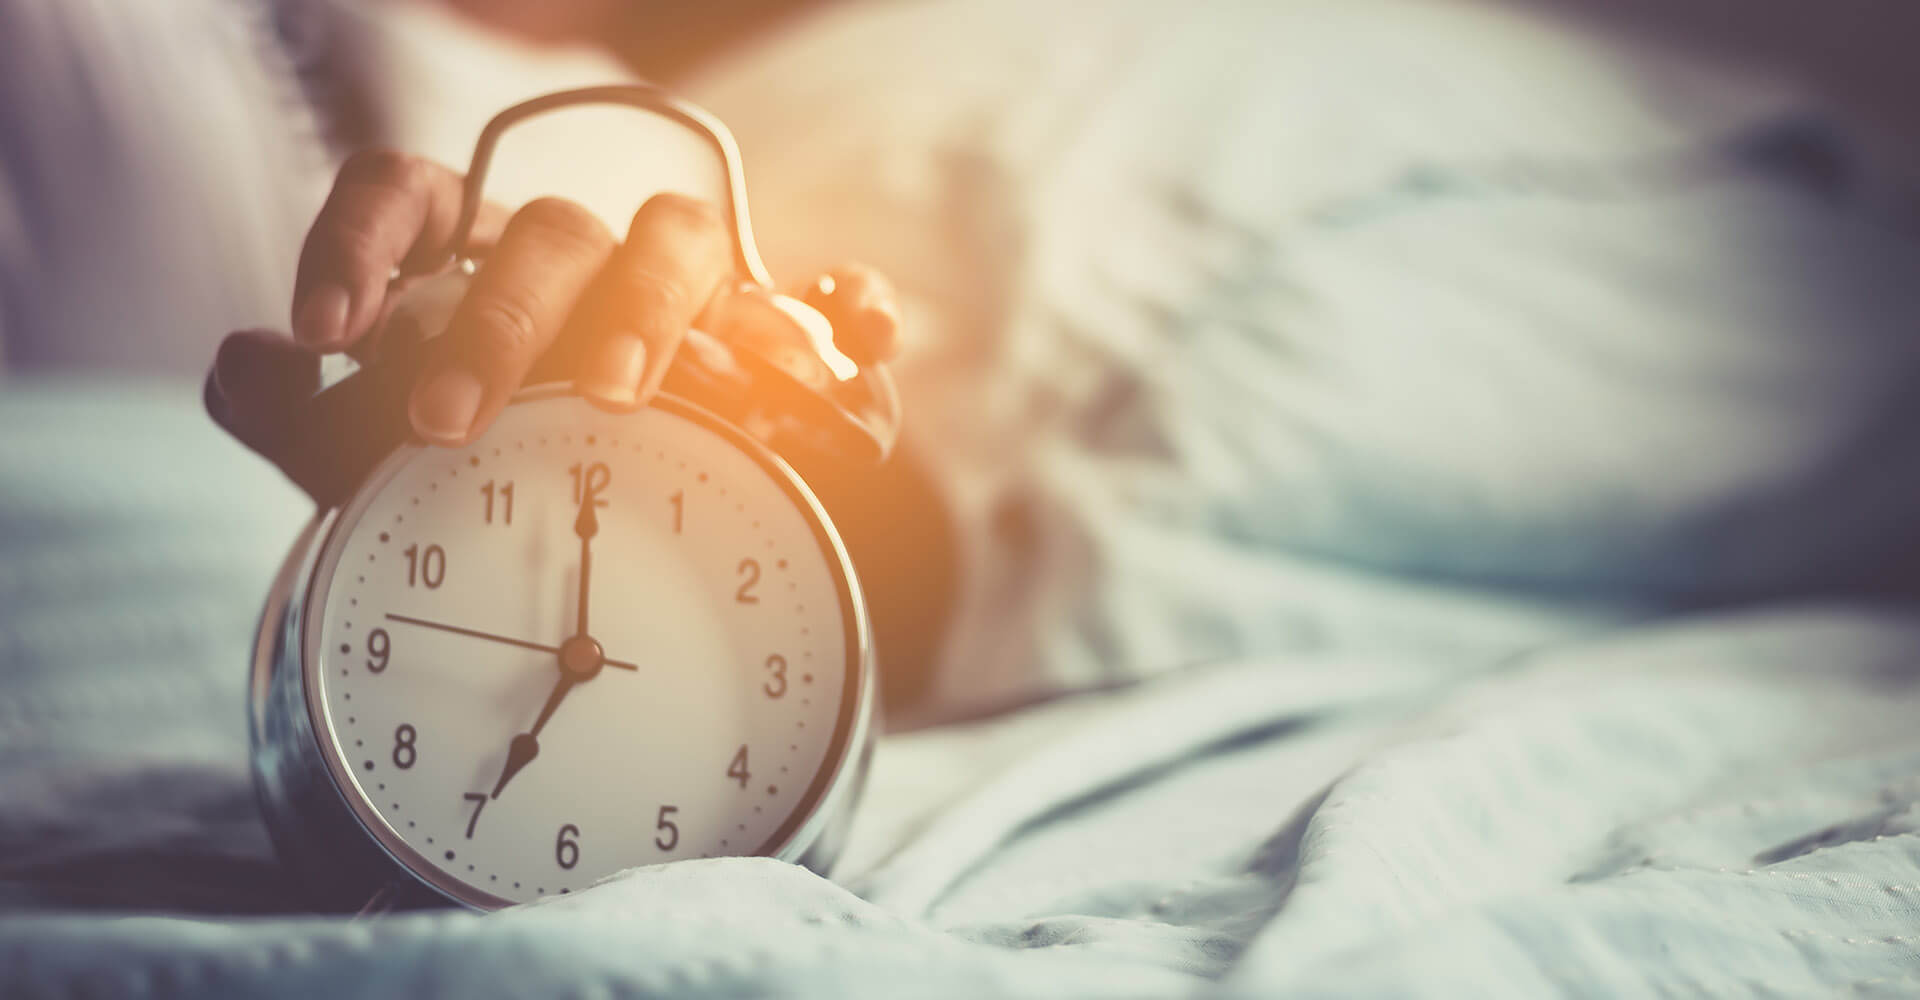 Woman with problems falling asleep turns off the alarm clock in the morning